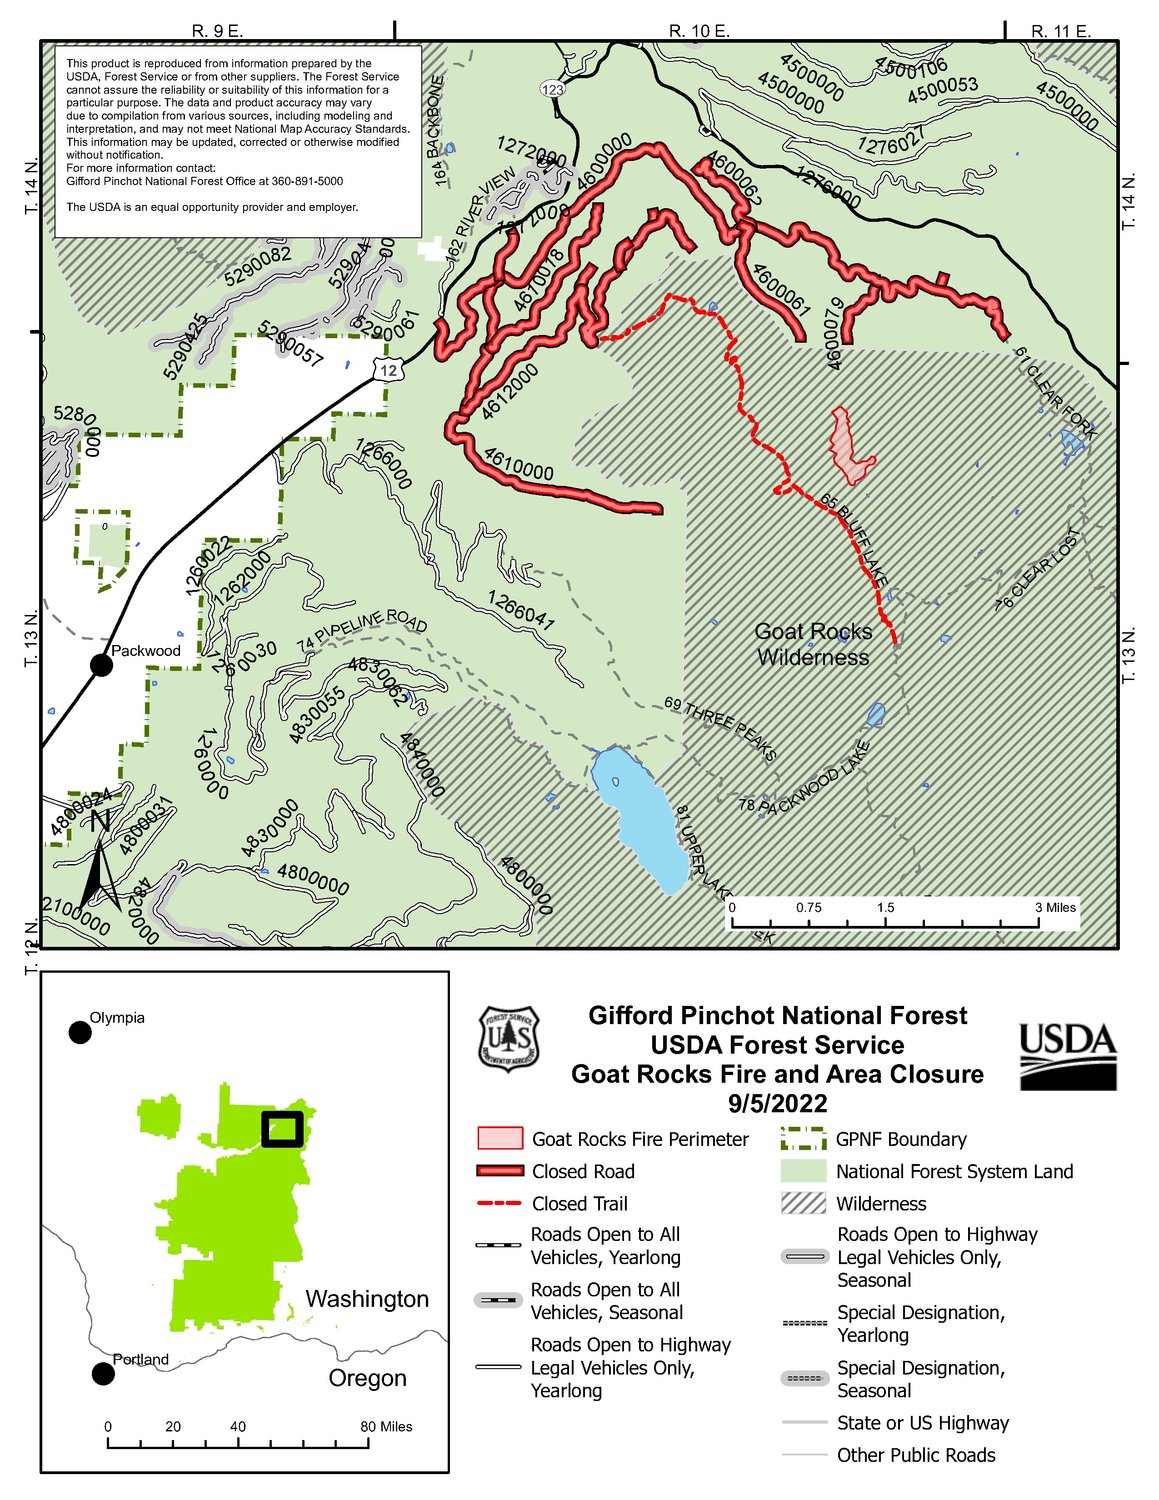 The Goat Rocks Wilderness Fire roughly 7 miles northeast of Packwood has grown to 80 acres. 